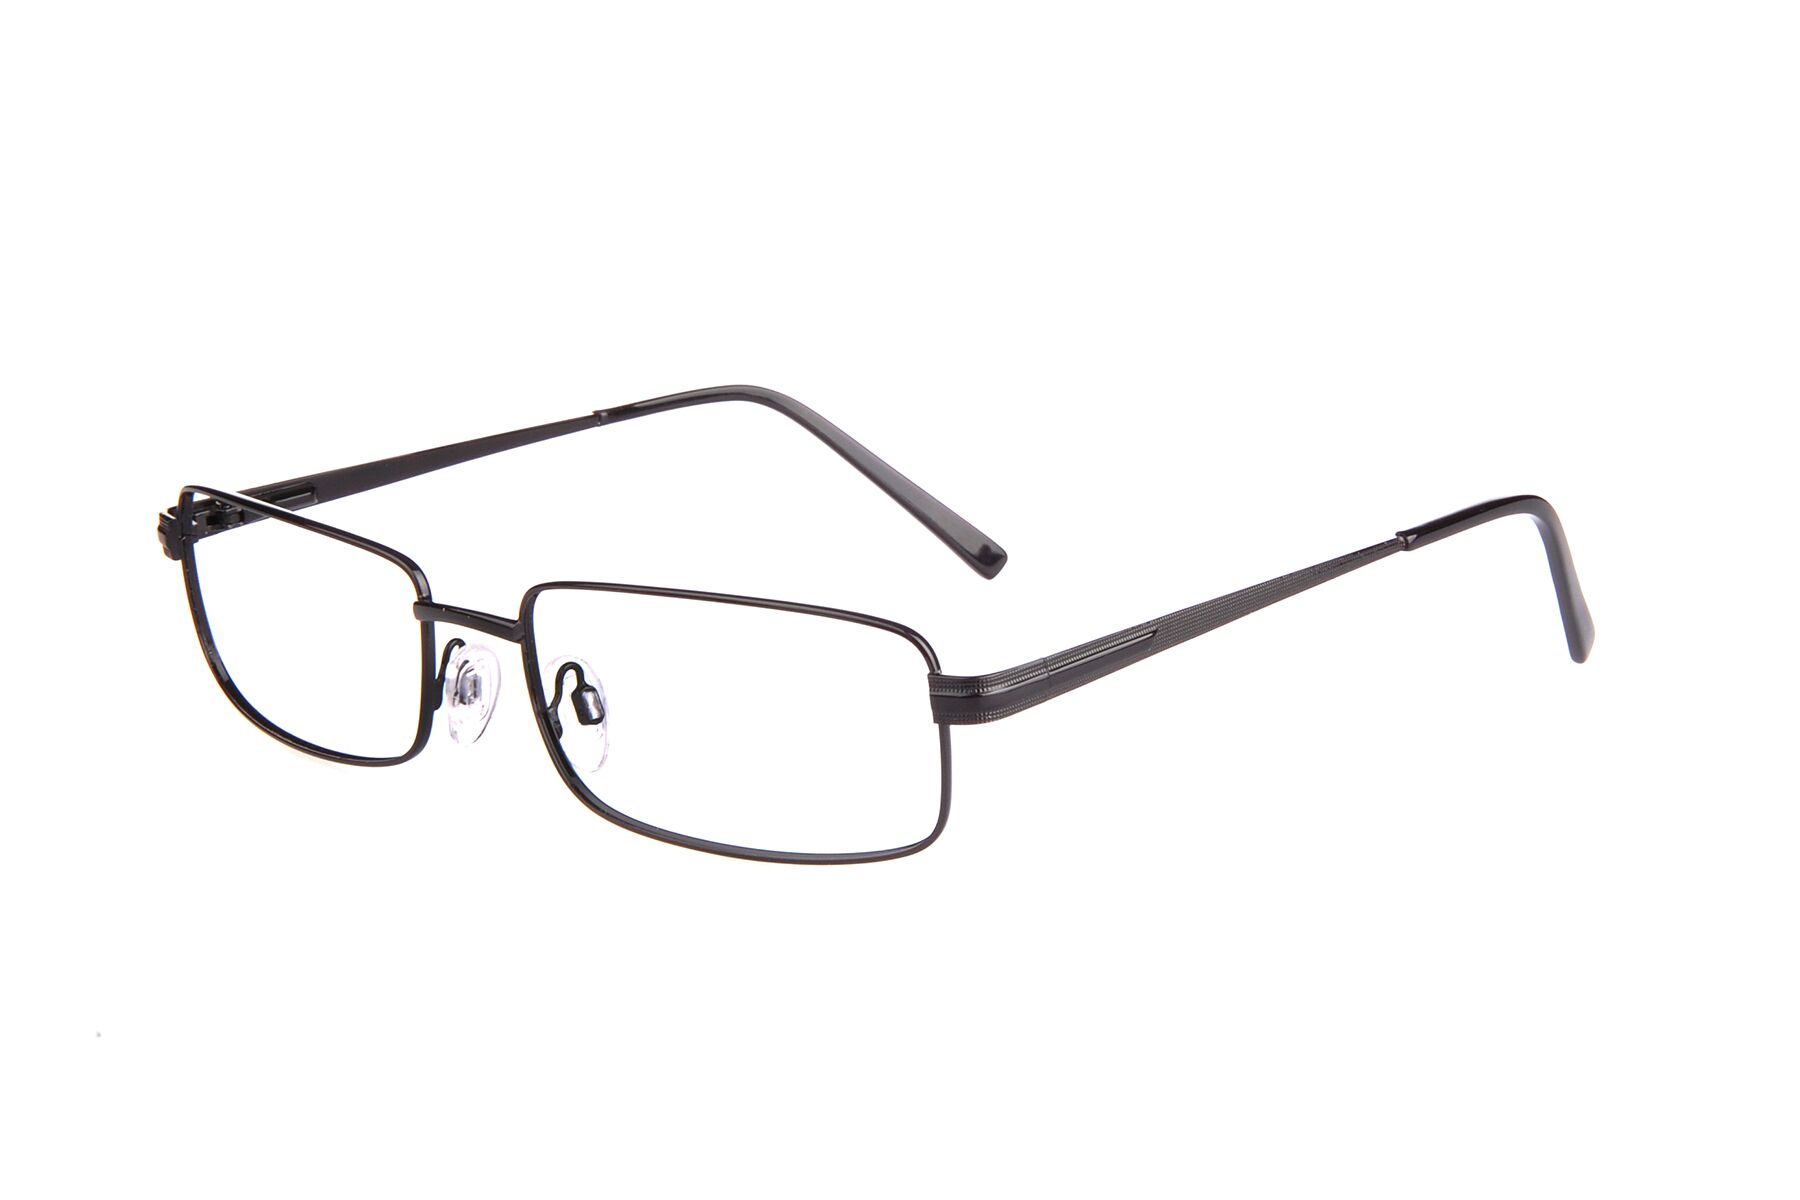 Wide Guyz Lefty is available at SpecsToGo-Eyeglasses and Sunglasses